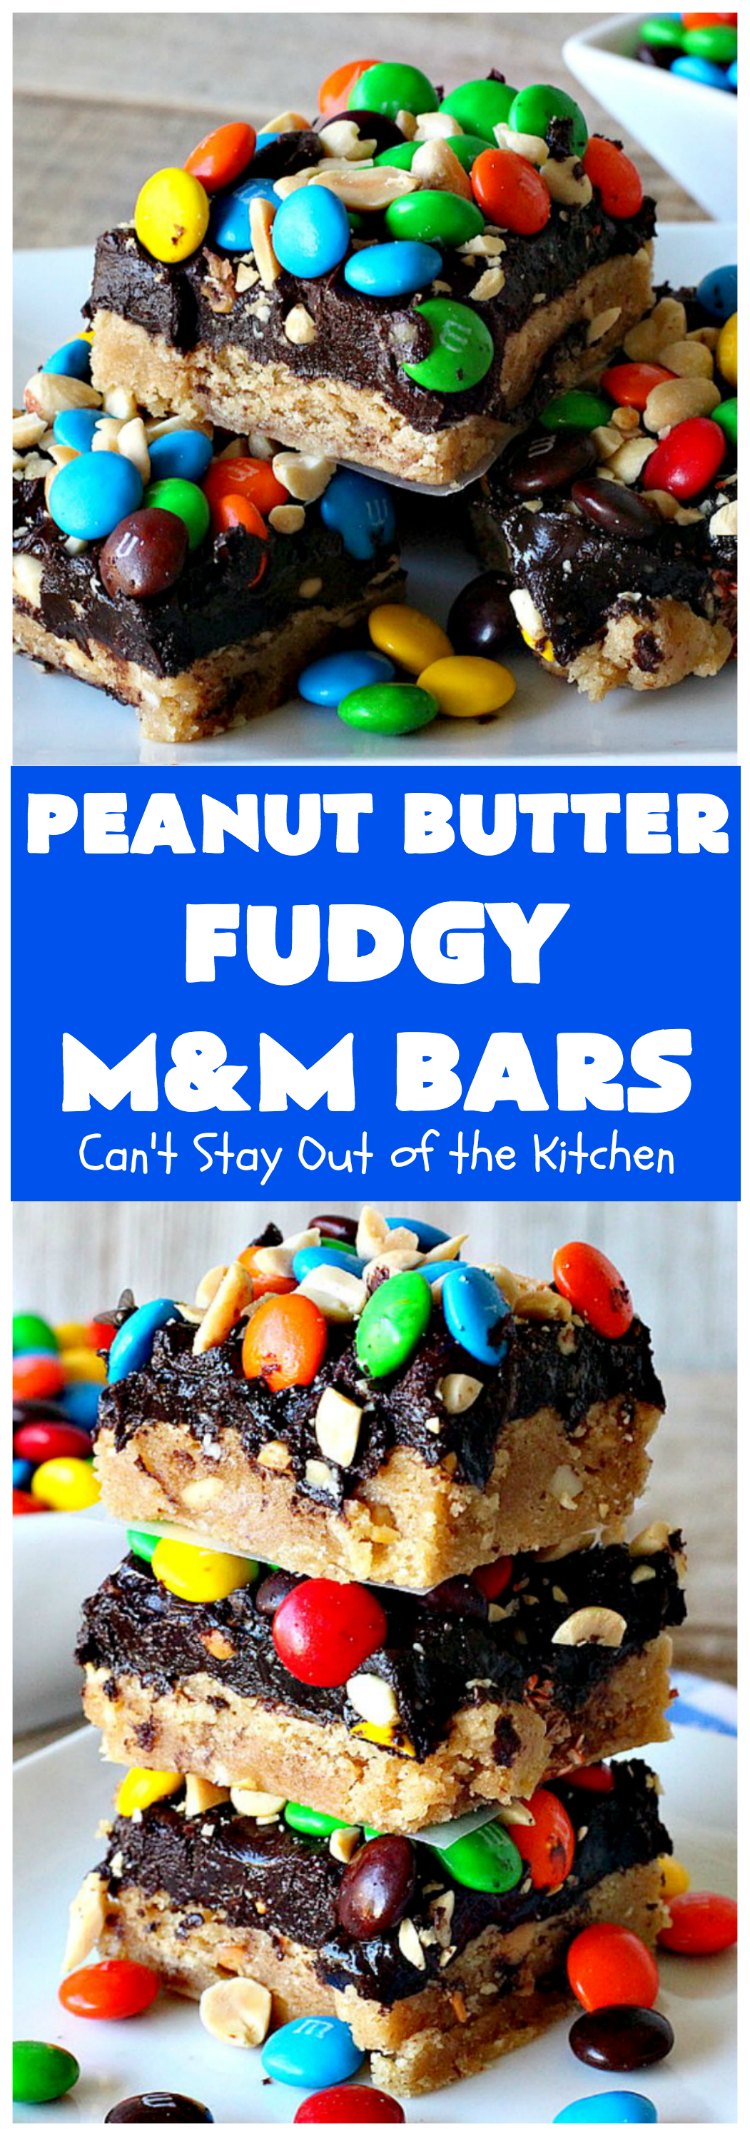 Peanut Butter Fudgy M&M Bars | Can't Stay Out of the Kitchen